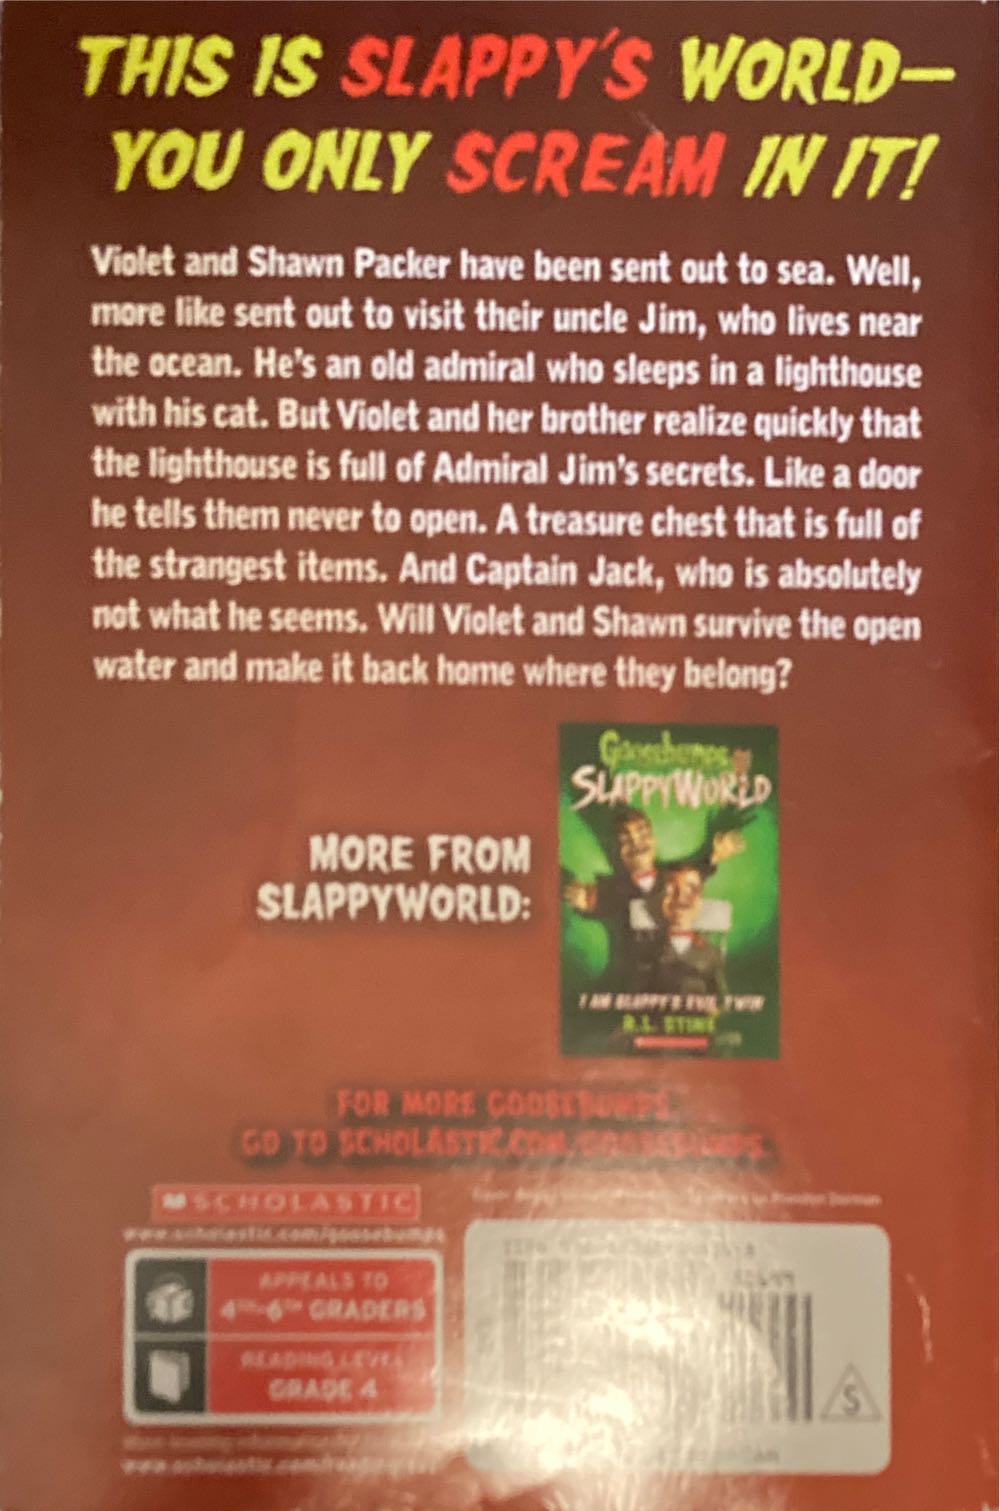 Goosebumps: Slappyworld Attack Of The Jack - R. L. Stine (Scholastic Paperbacks - Paperback) book collectible [Barcode 9781338068368] - Main Image 2